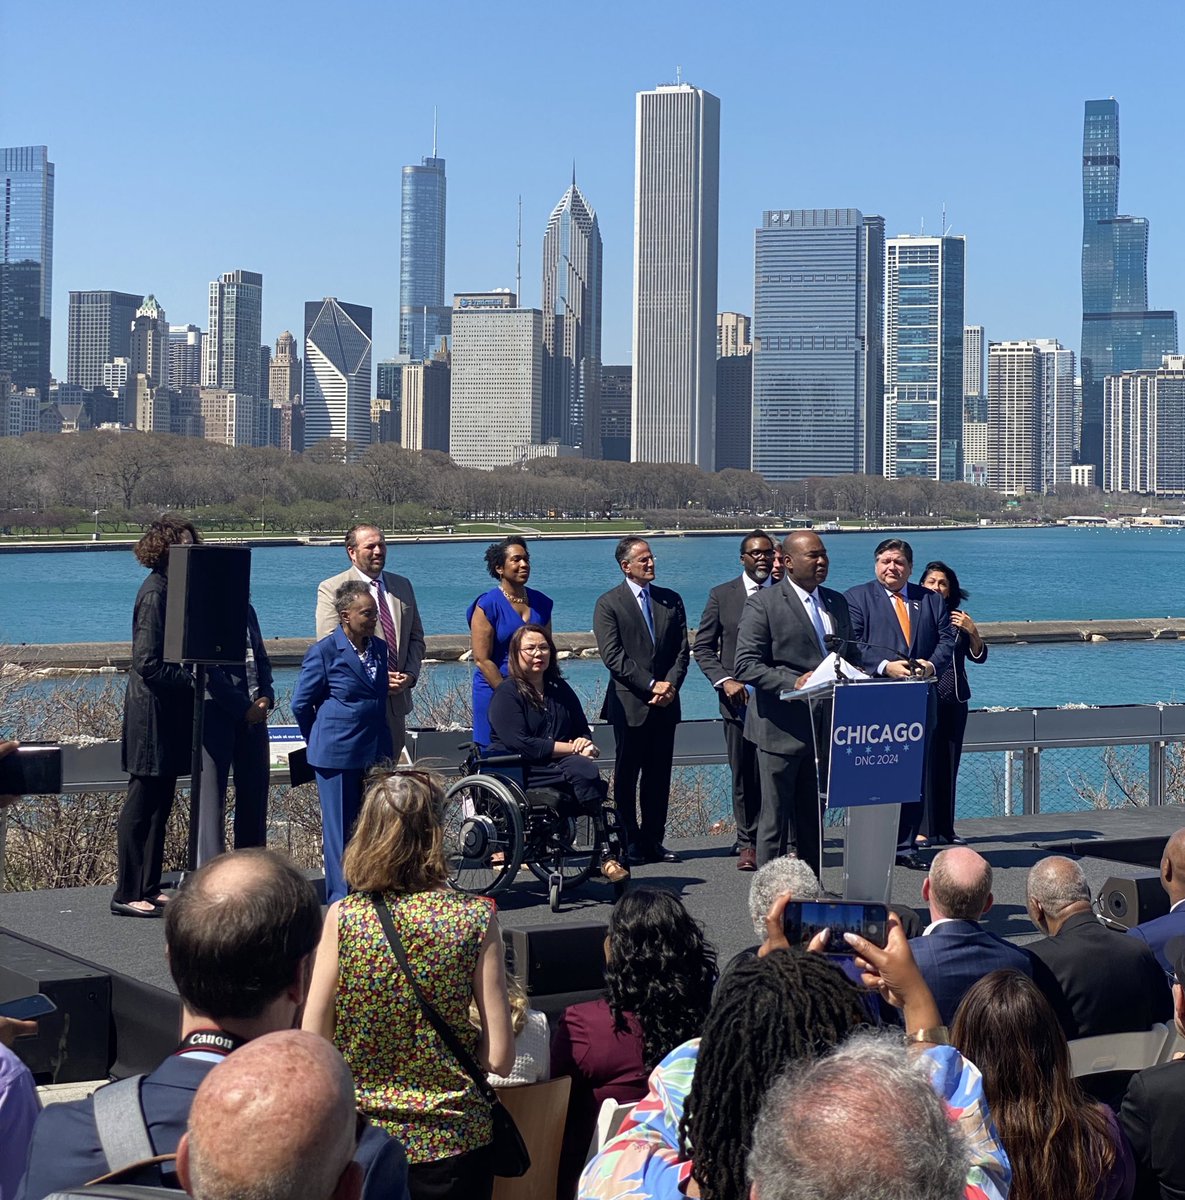 One year ago today, I was proud to announce Chicago as the host city of the 2024 Democratic National Convention. From Aug 19-22, @JoeBiden, @KamalaHarris, & @TheDemocrats will tell the story of their historic record and the high stakes of this election. #DNC2024